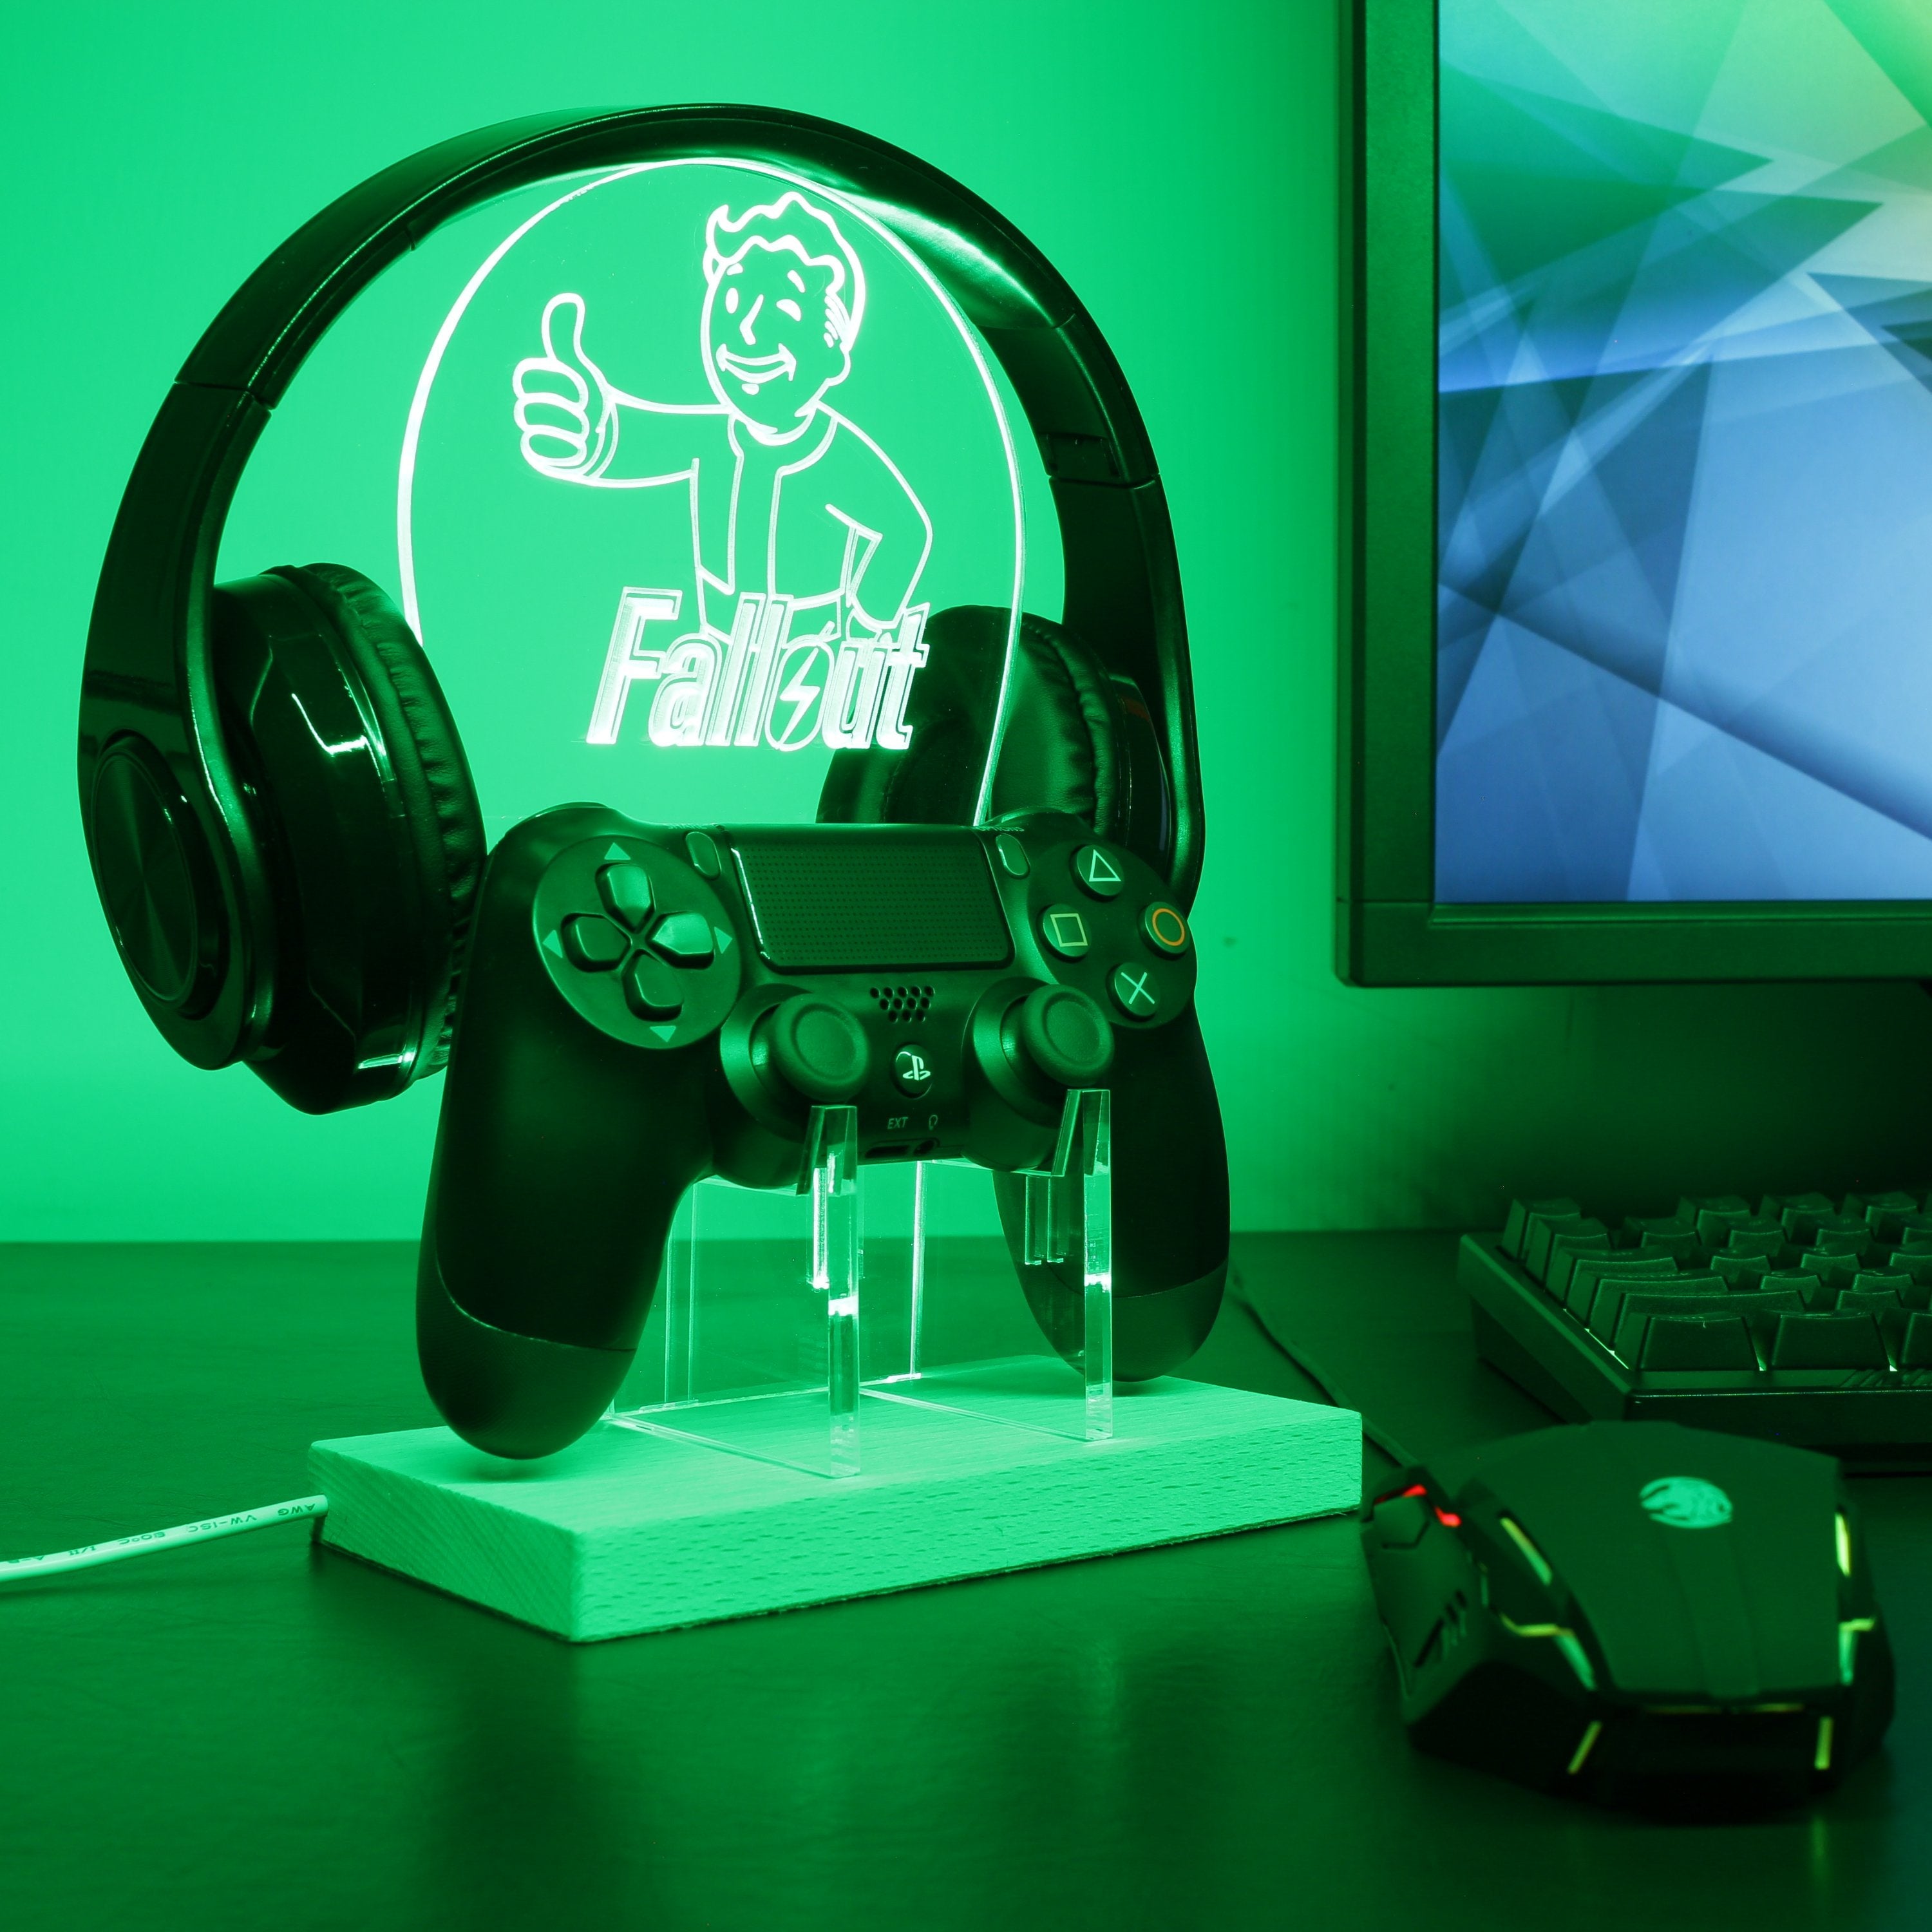 Fallout LED Gaming Headset Controller Stand